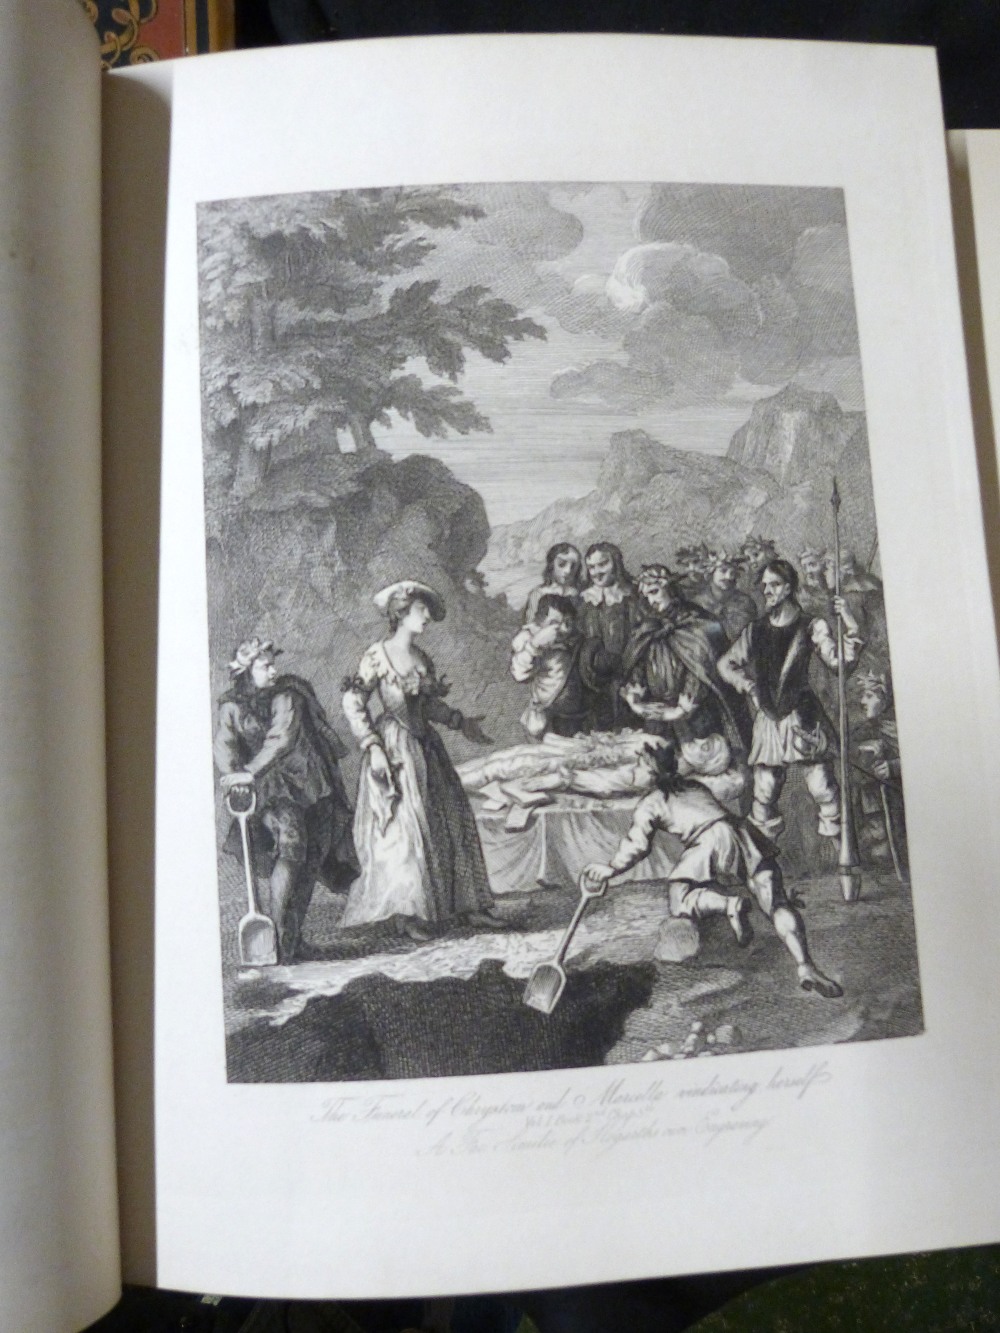 WILLIAM HOGARTH: THE COMPLETE WORKS..., intro James Hannay, descriptive letterpress by John - Image 5 of 7